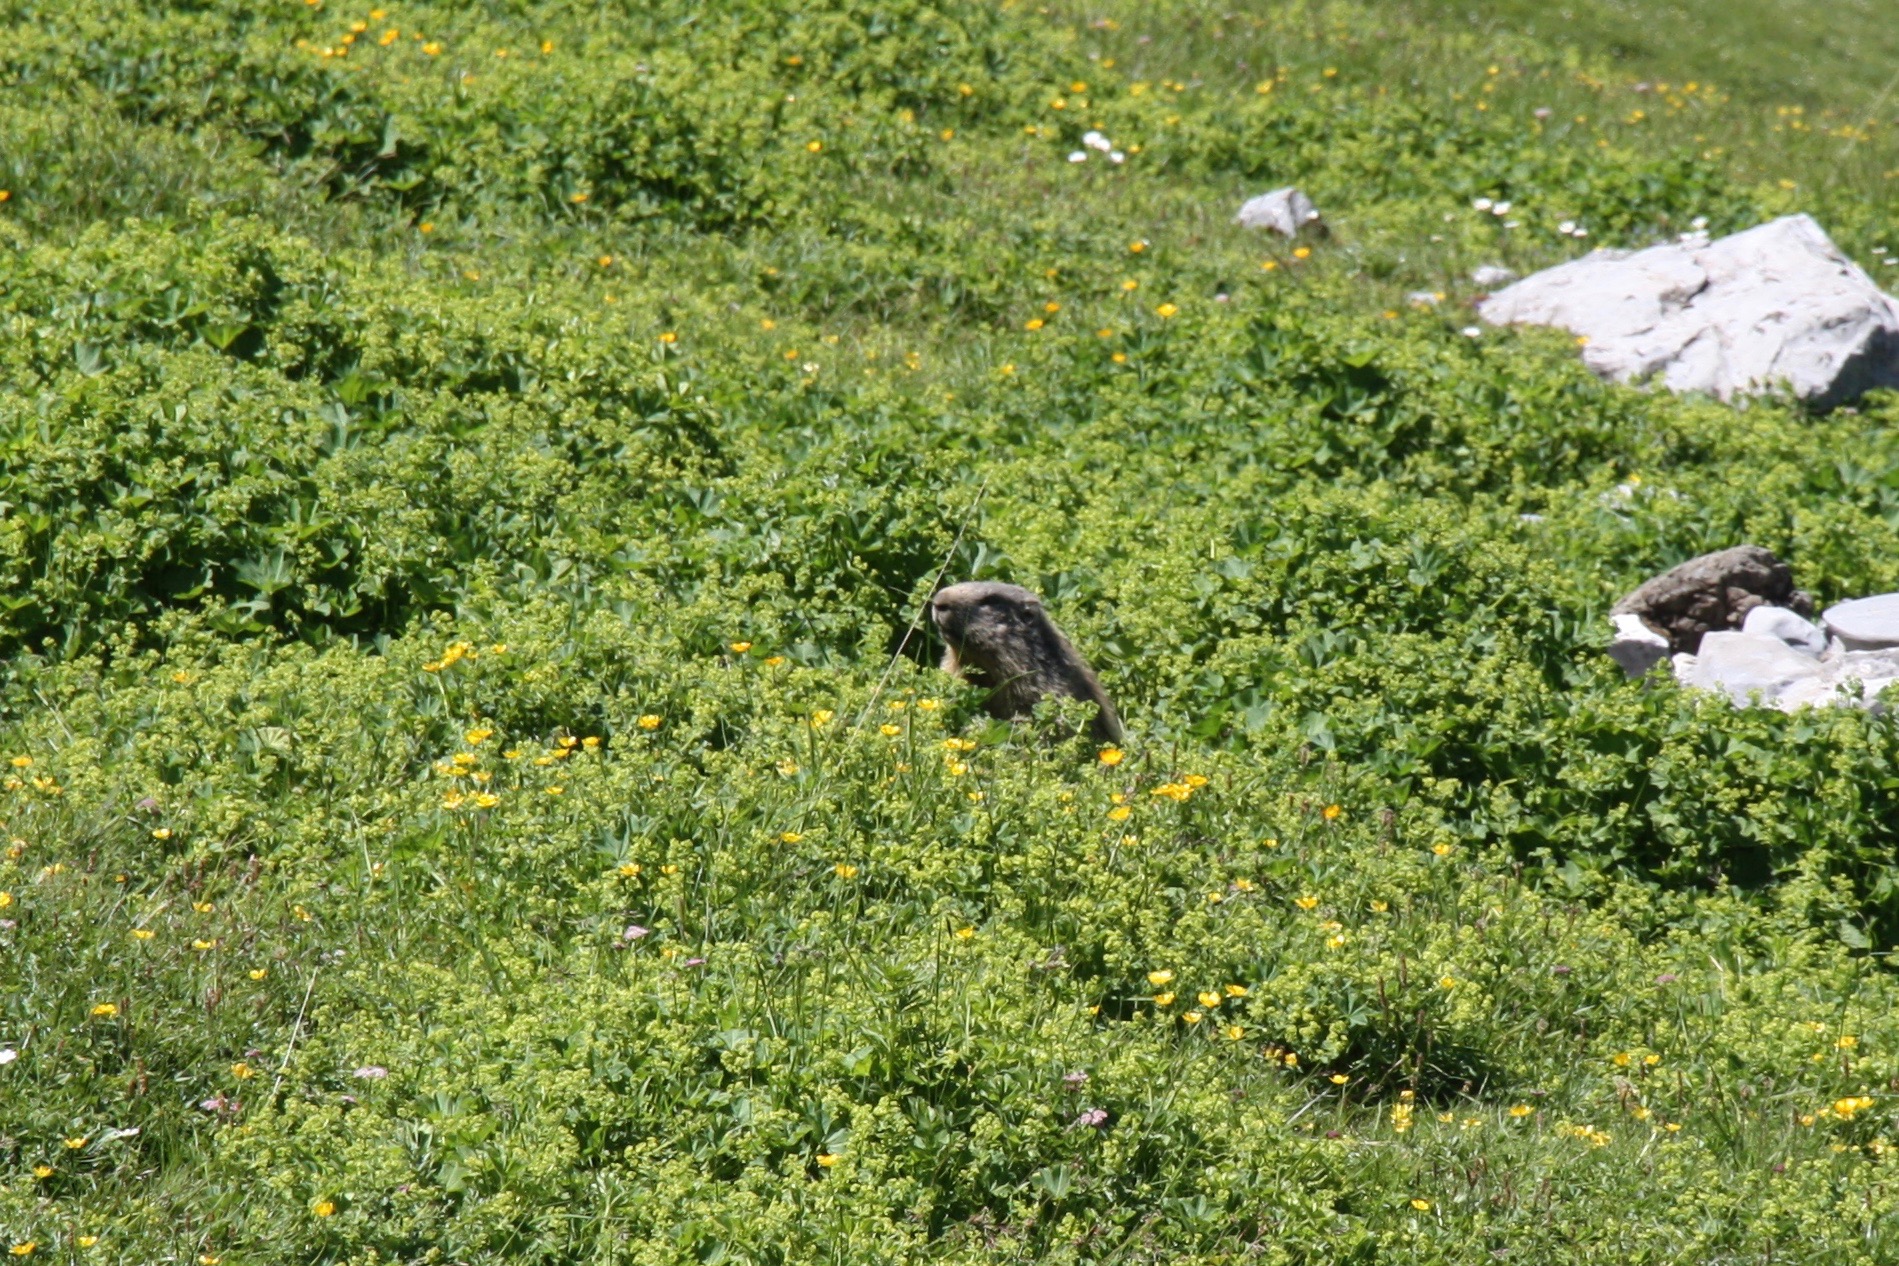 A marmot pokes it head out from among the alpine meadow flowers.